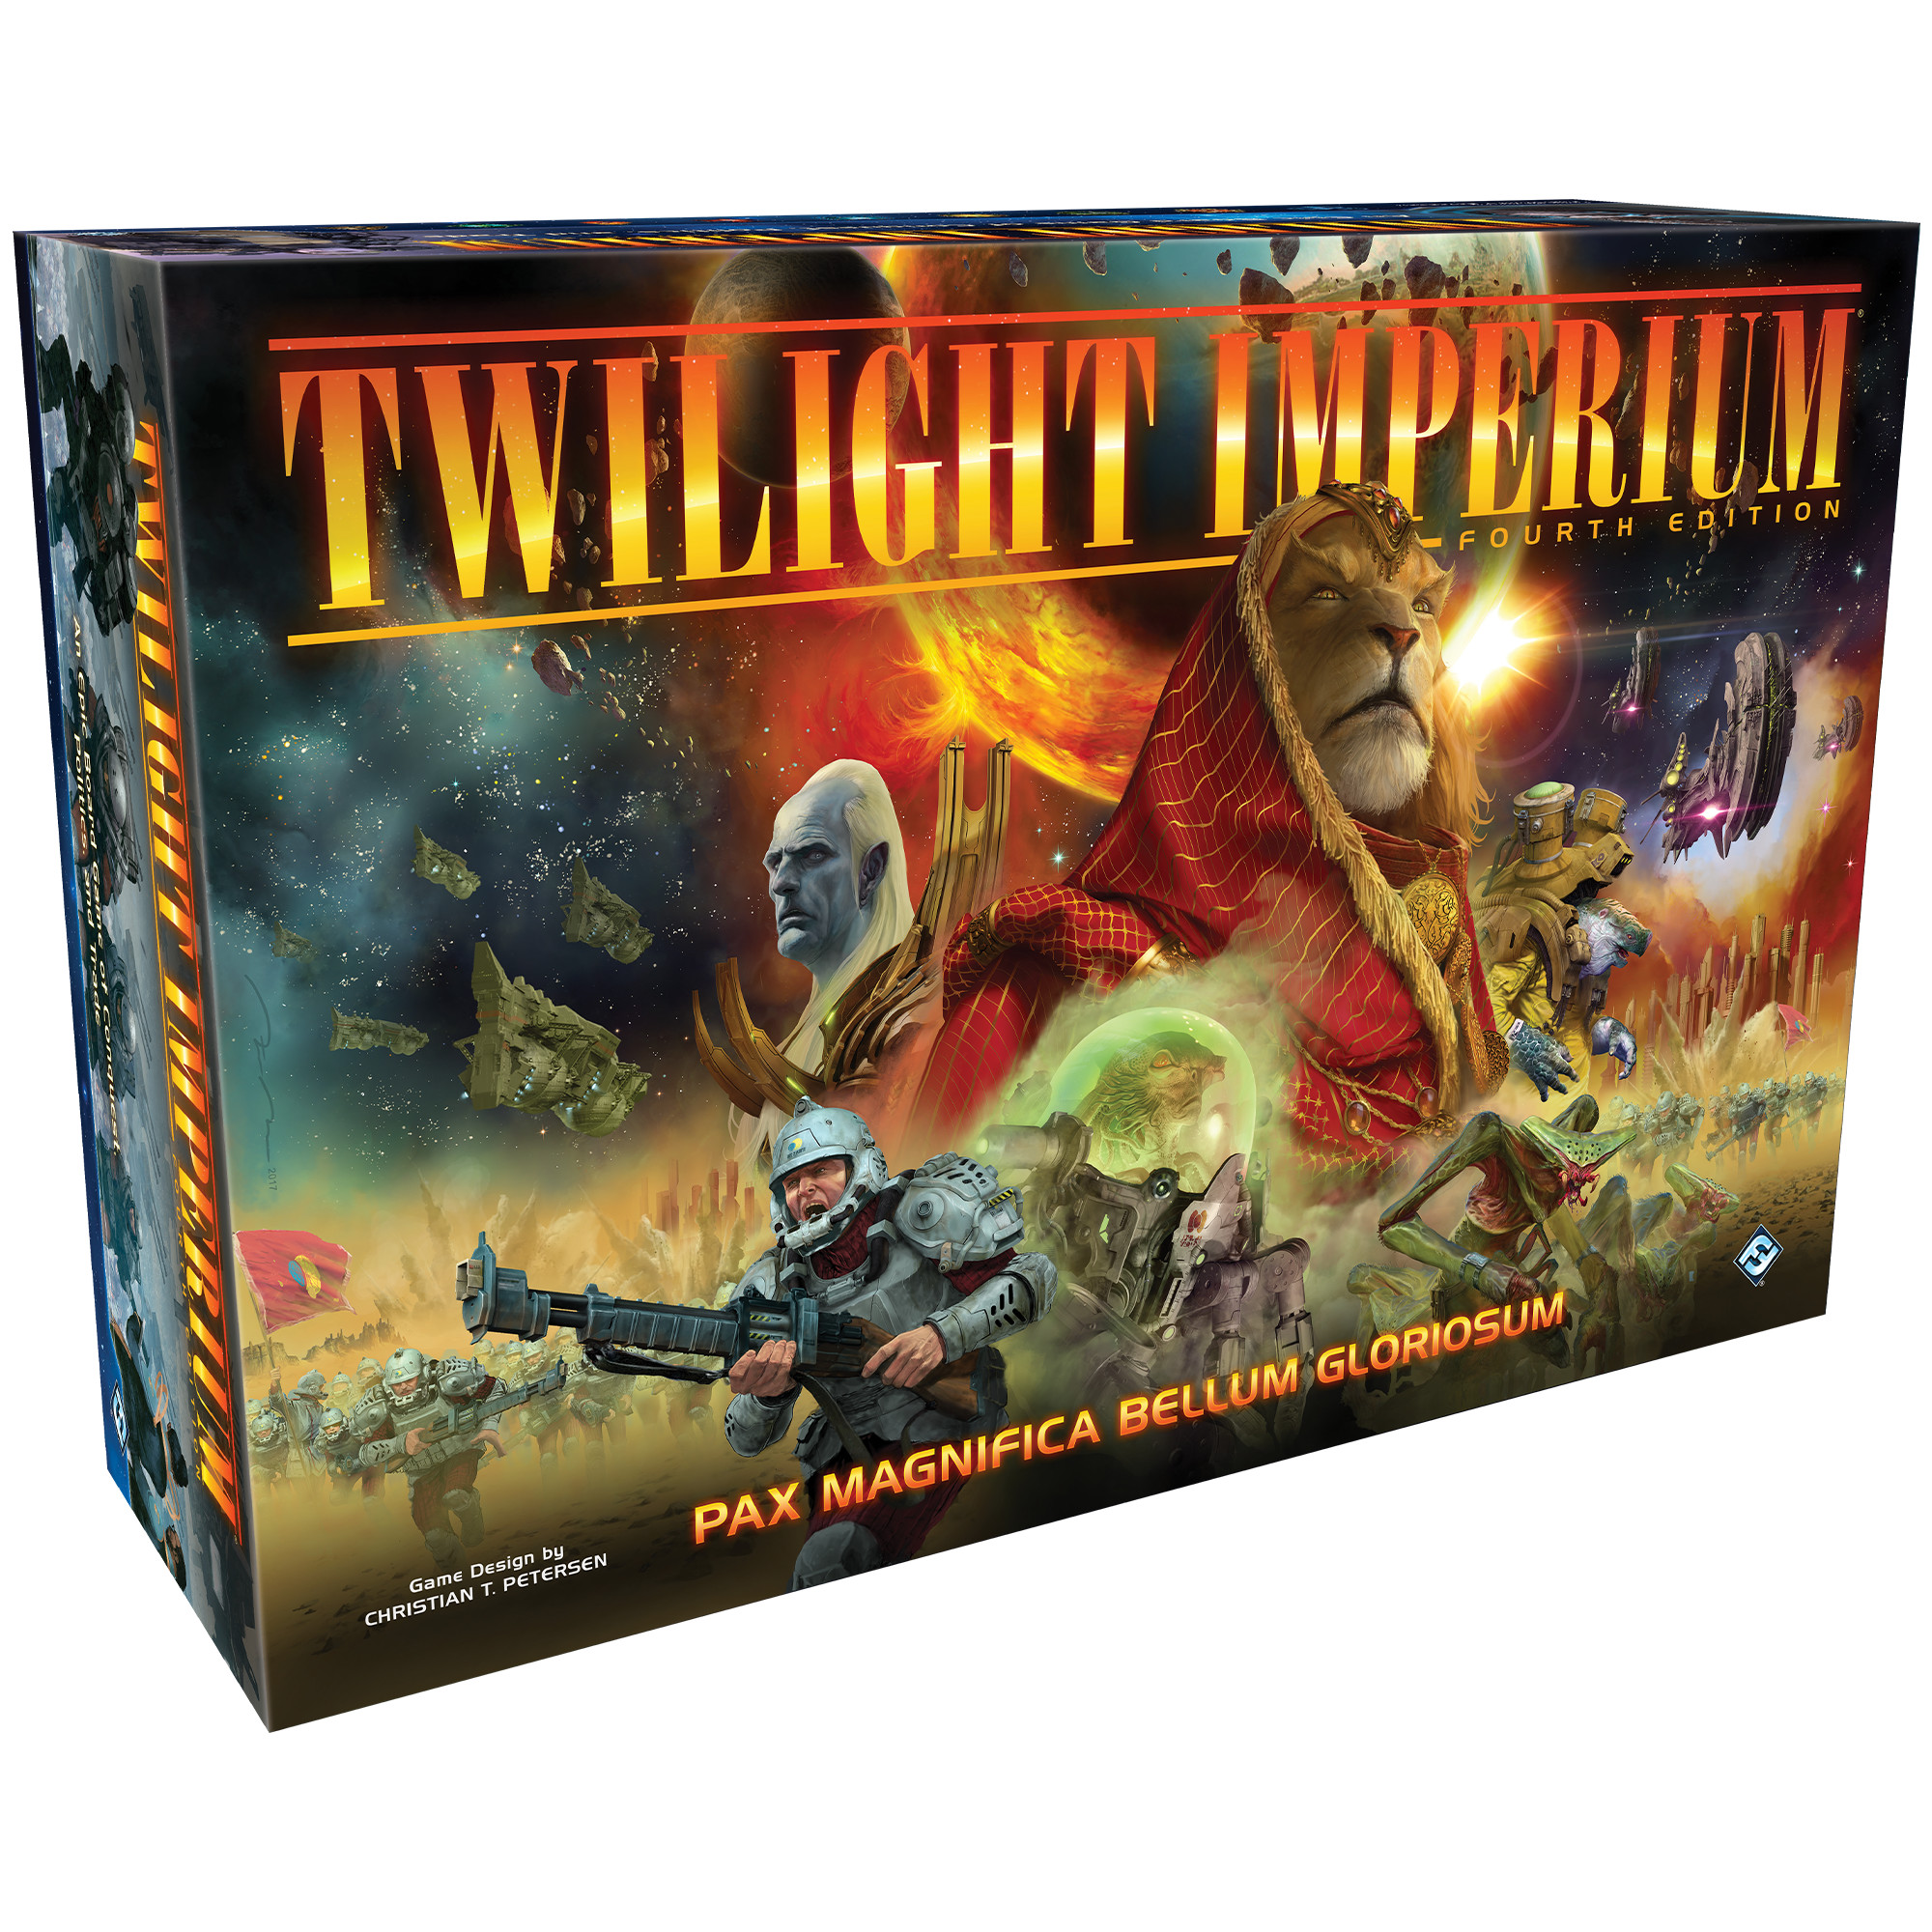 Twilight Imperium: 4th Edition Strategy Board Game for ages 14 and up, from Asmodee - image 1 of 6